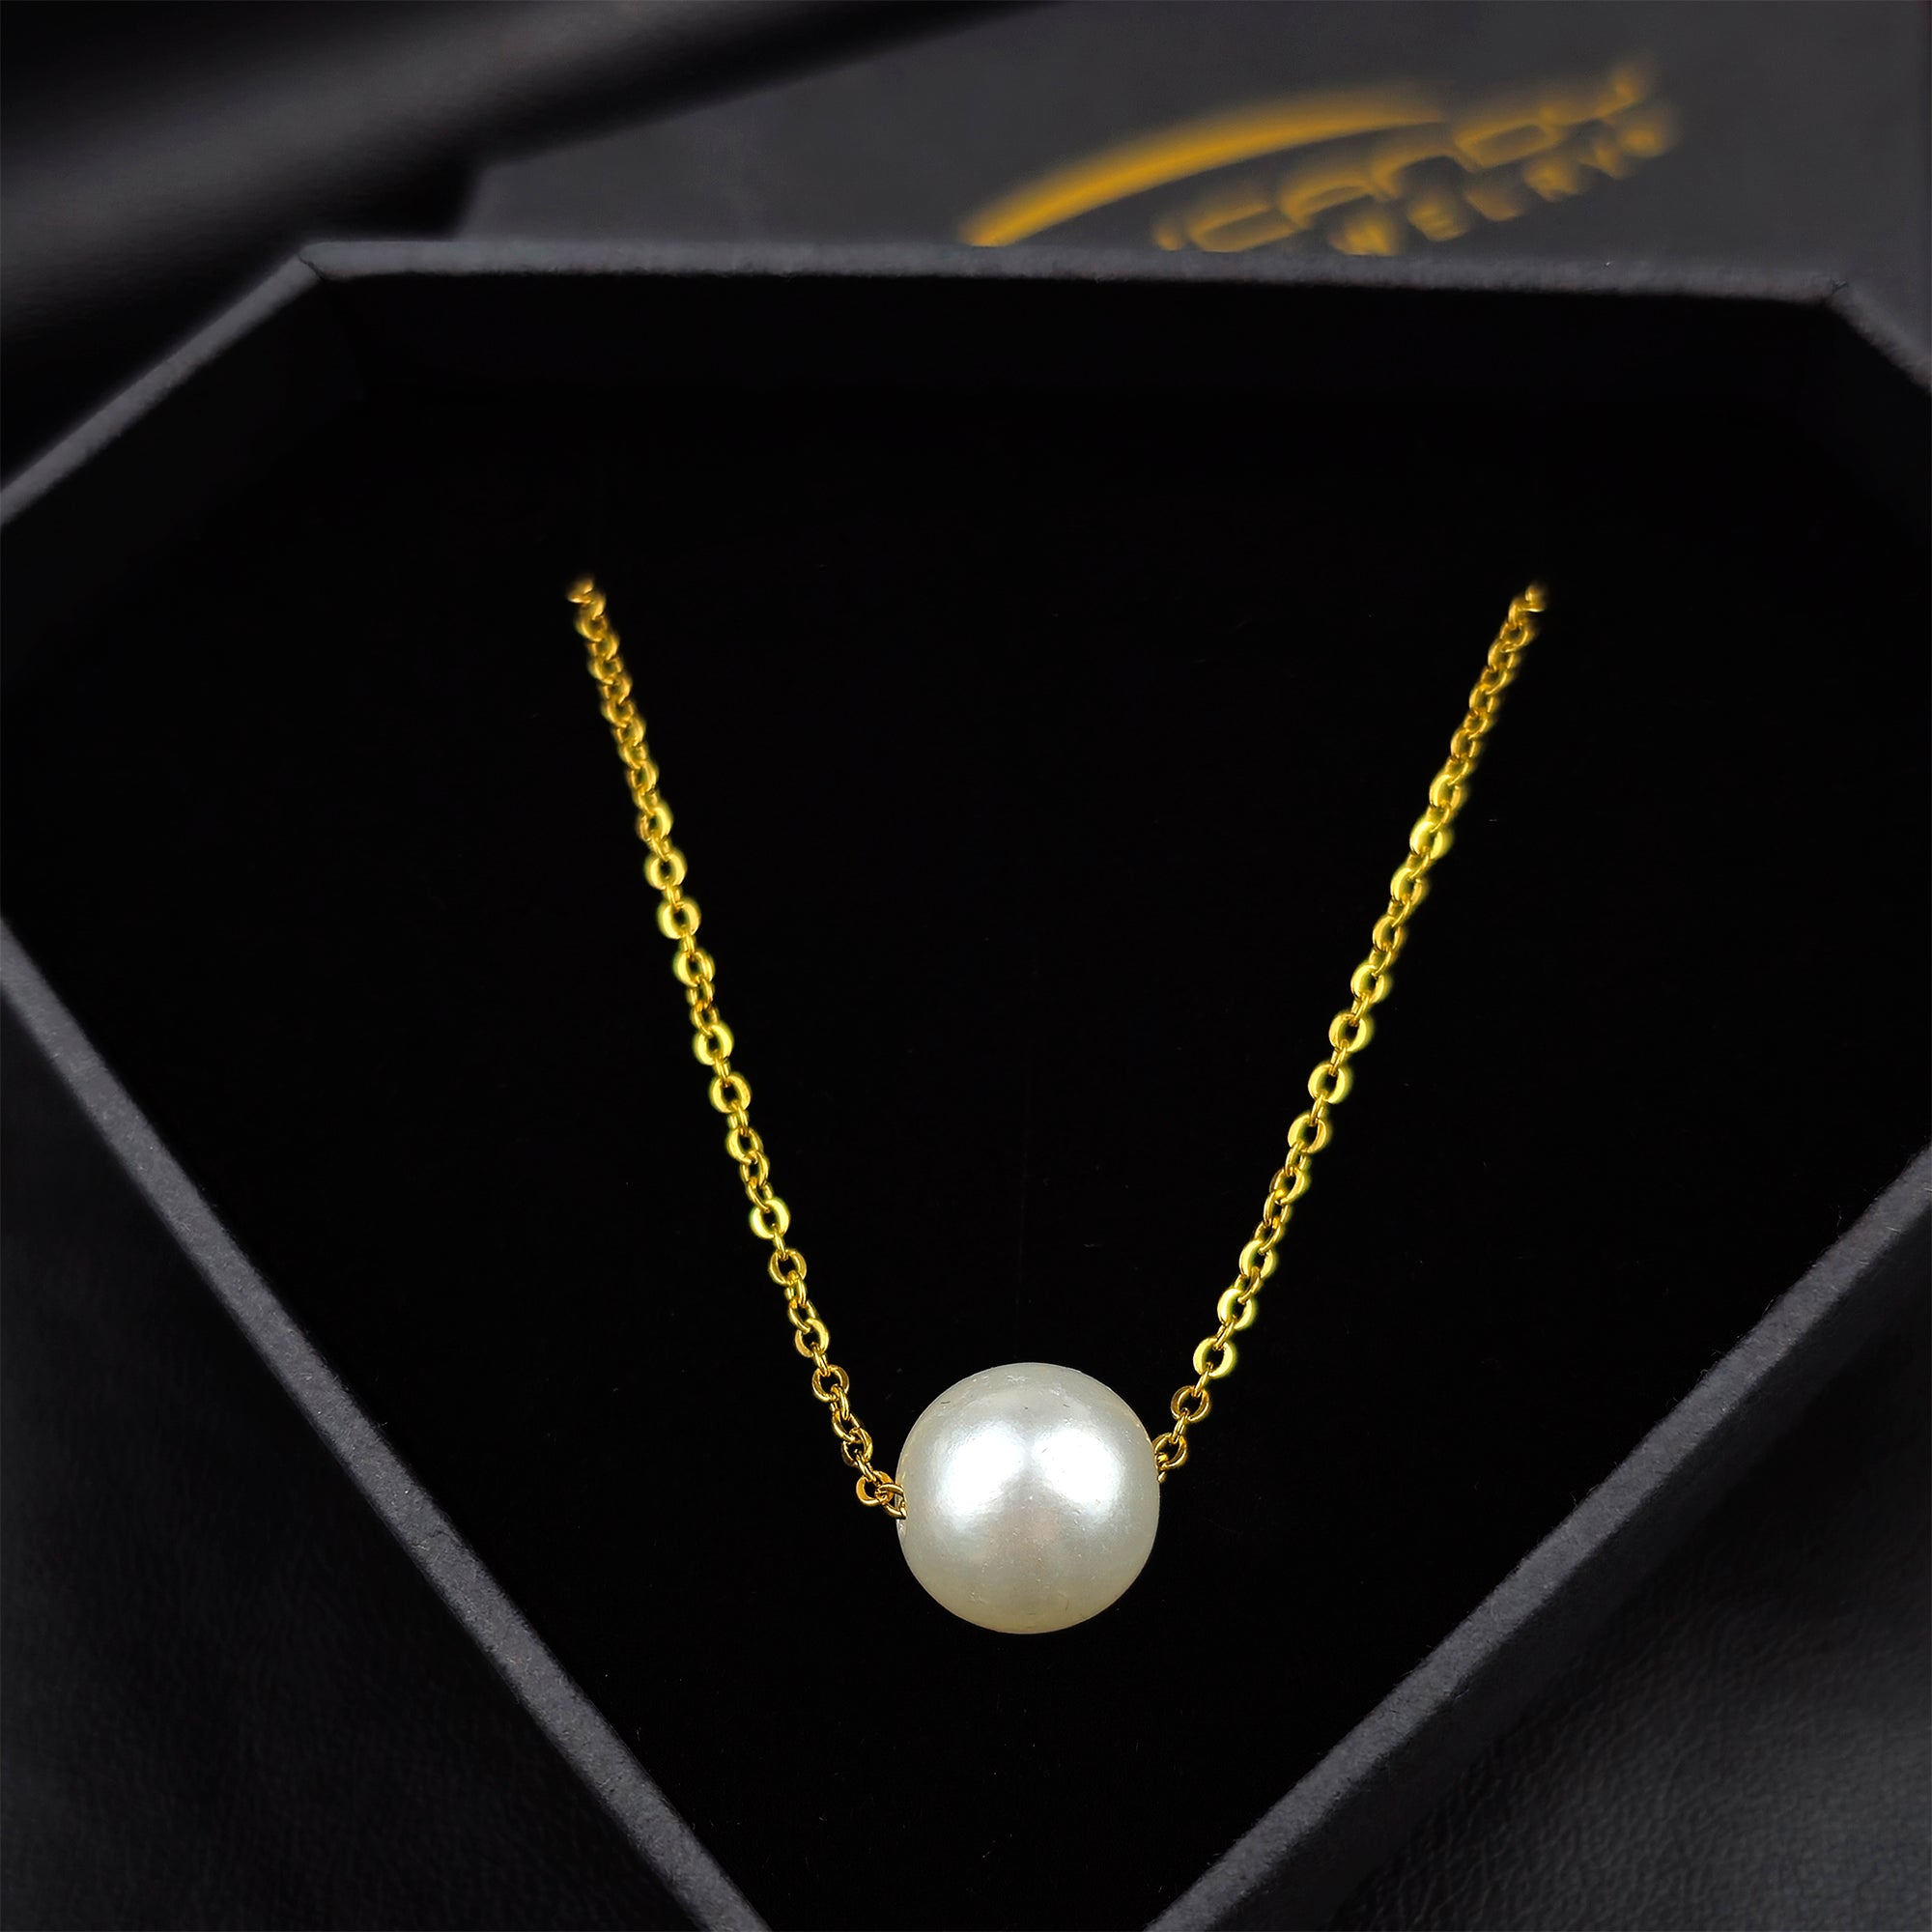 Stainless Steel Gold Tone PVD Chain Necklace Minimalist Pearl Pendant Necklace